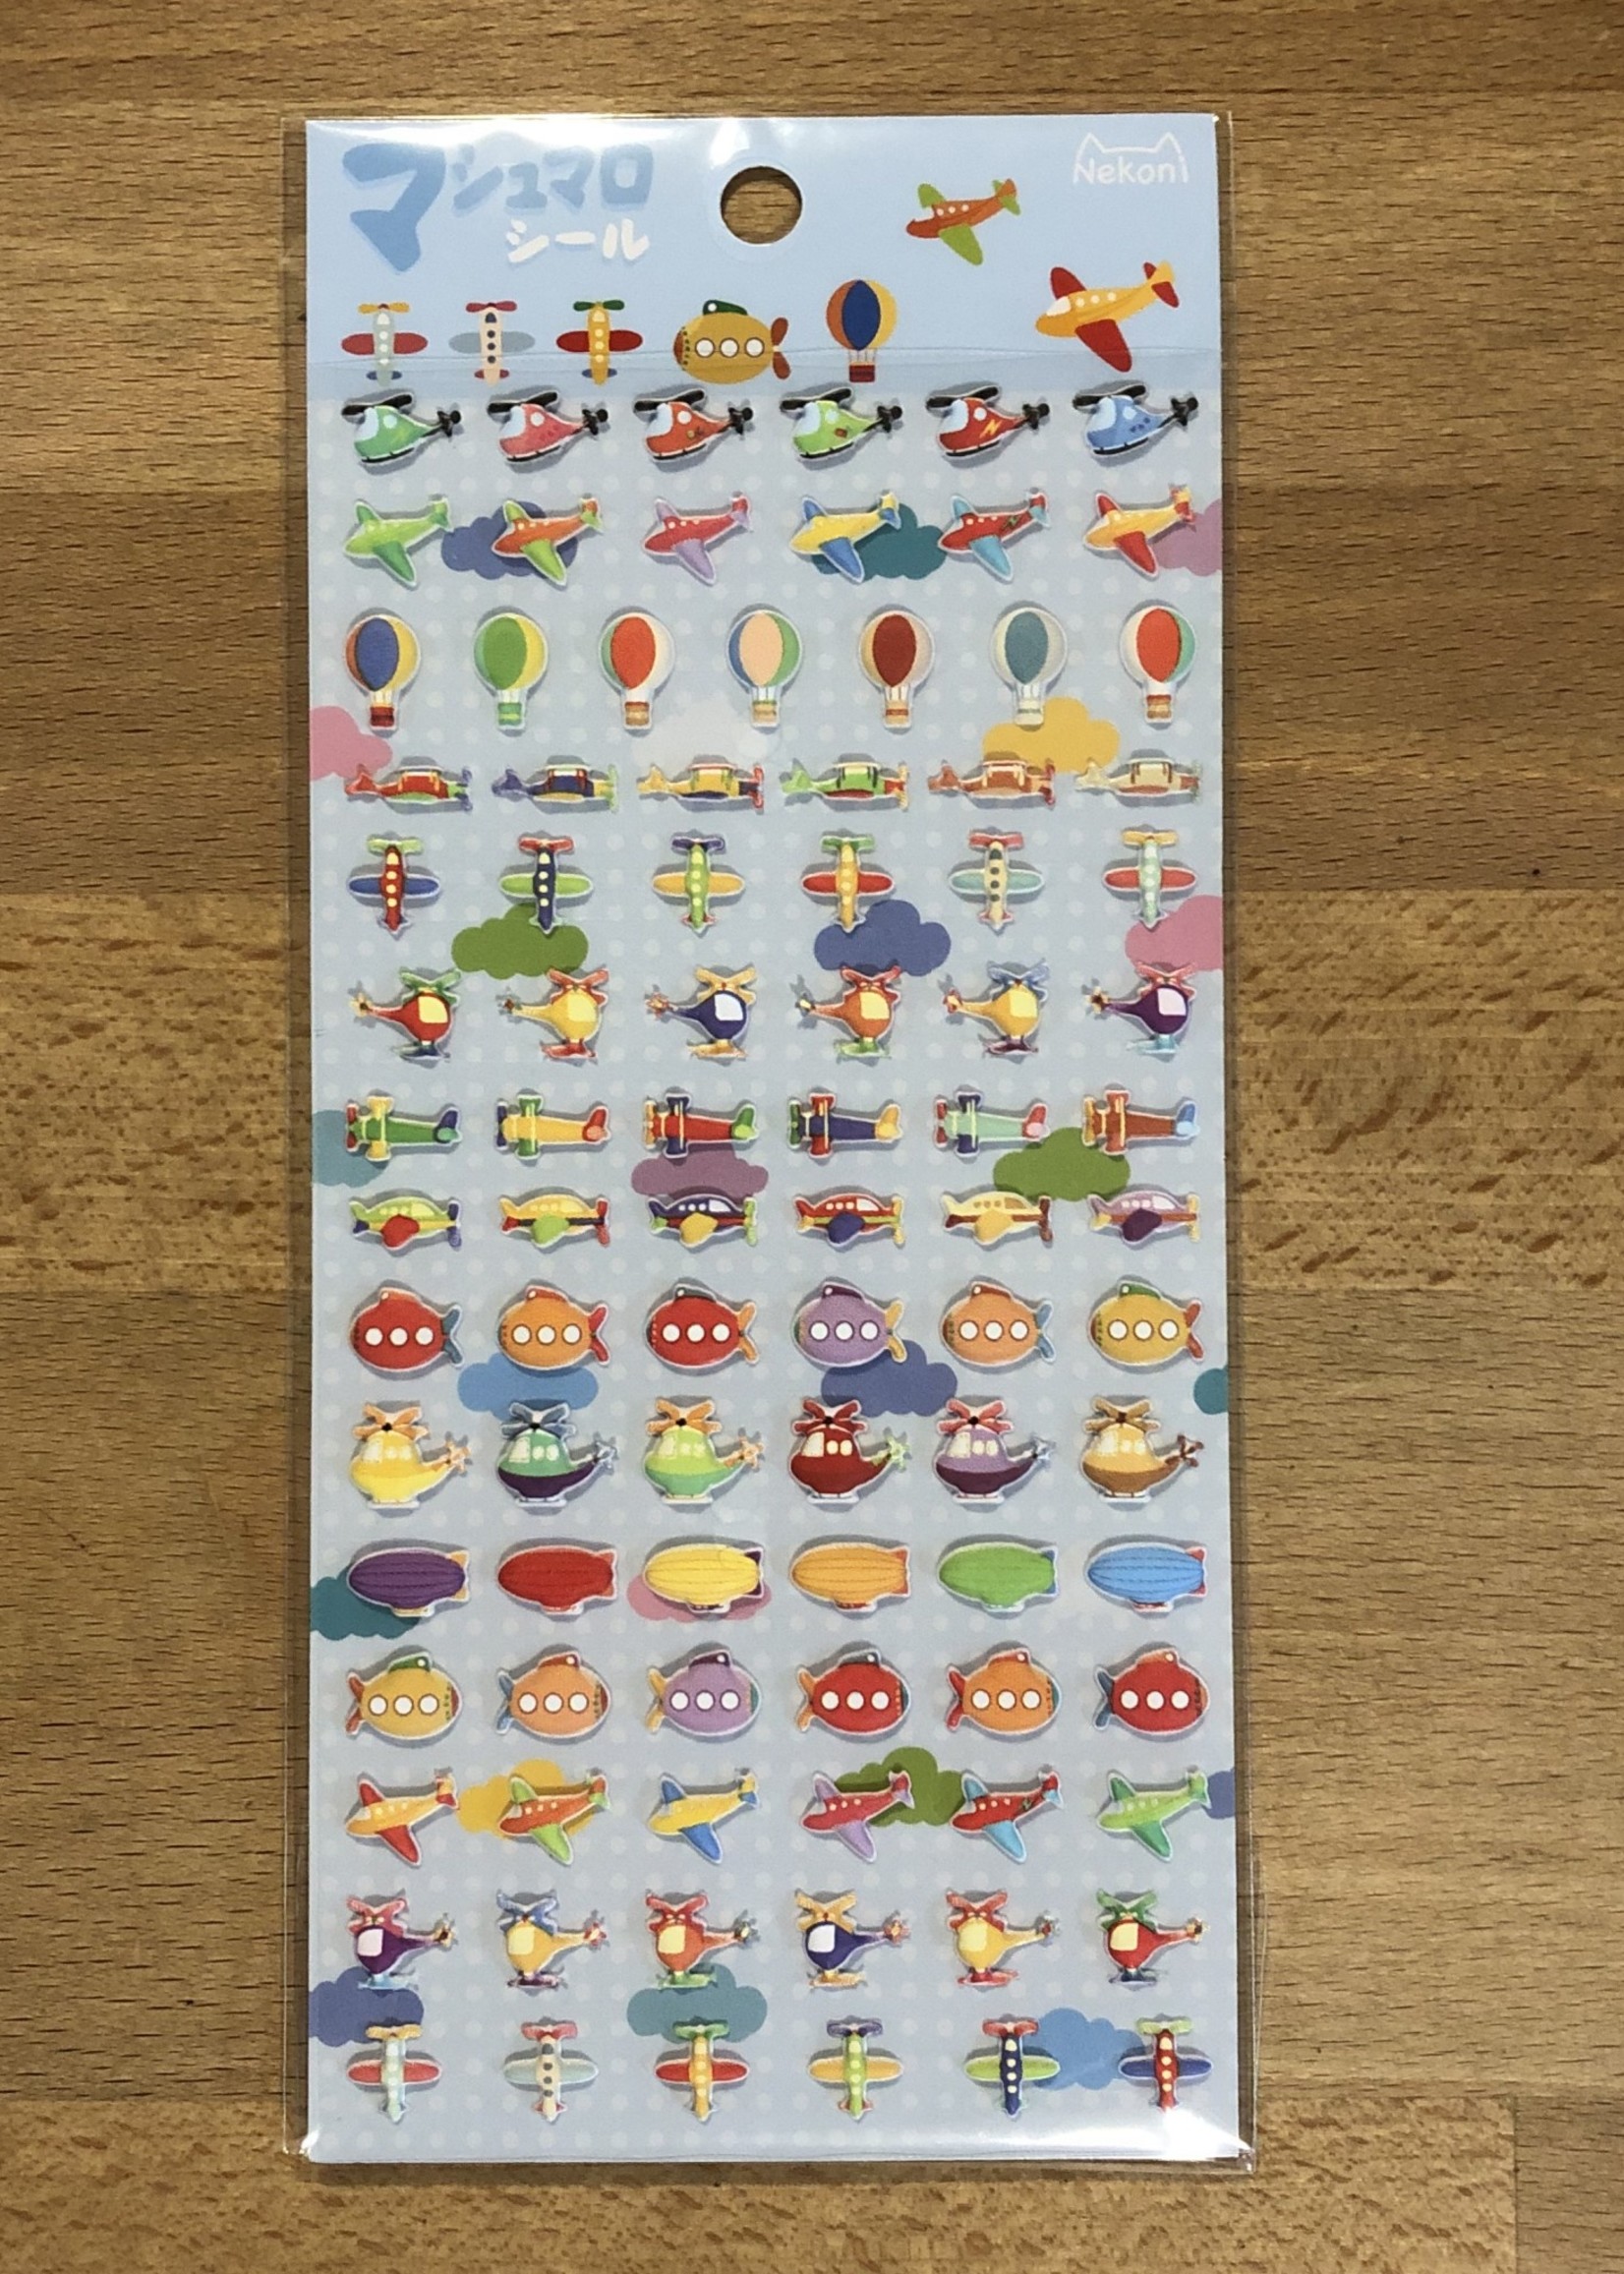 Flying Tiny Puffy Stickers